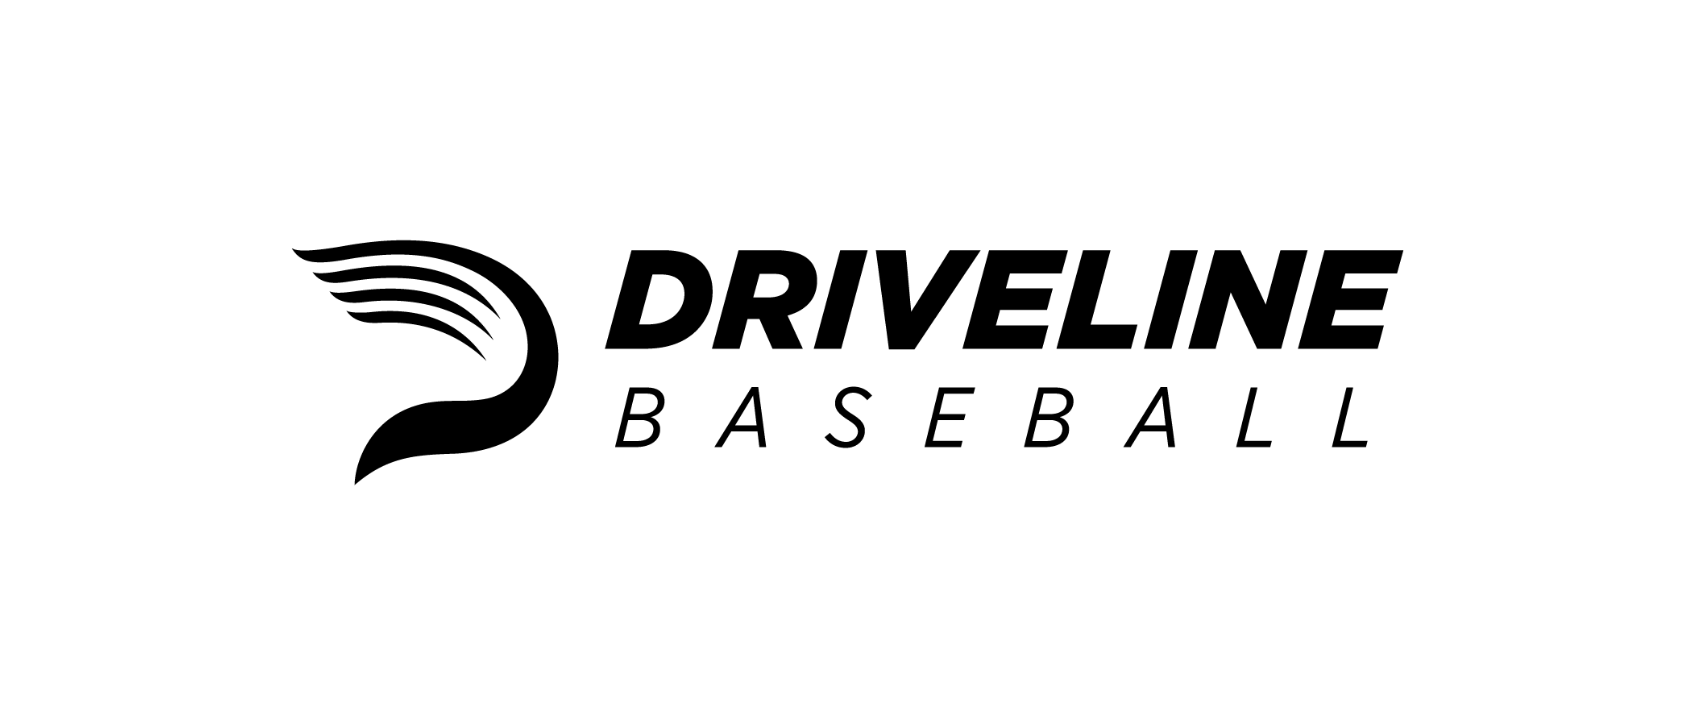 WCL Announces Driveline Partnership Kamloops NorthPaws